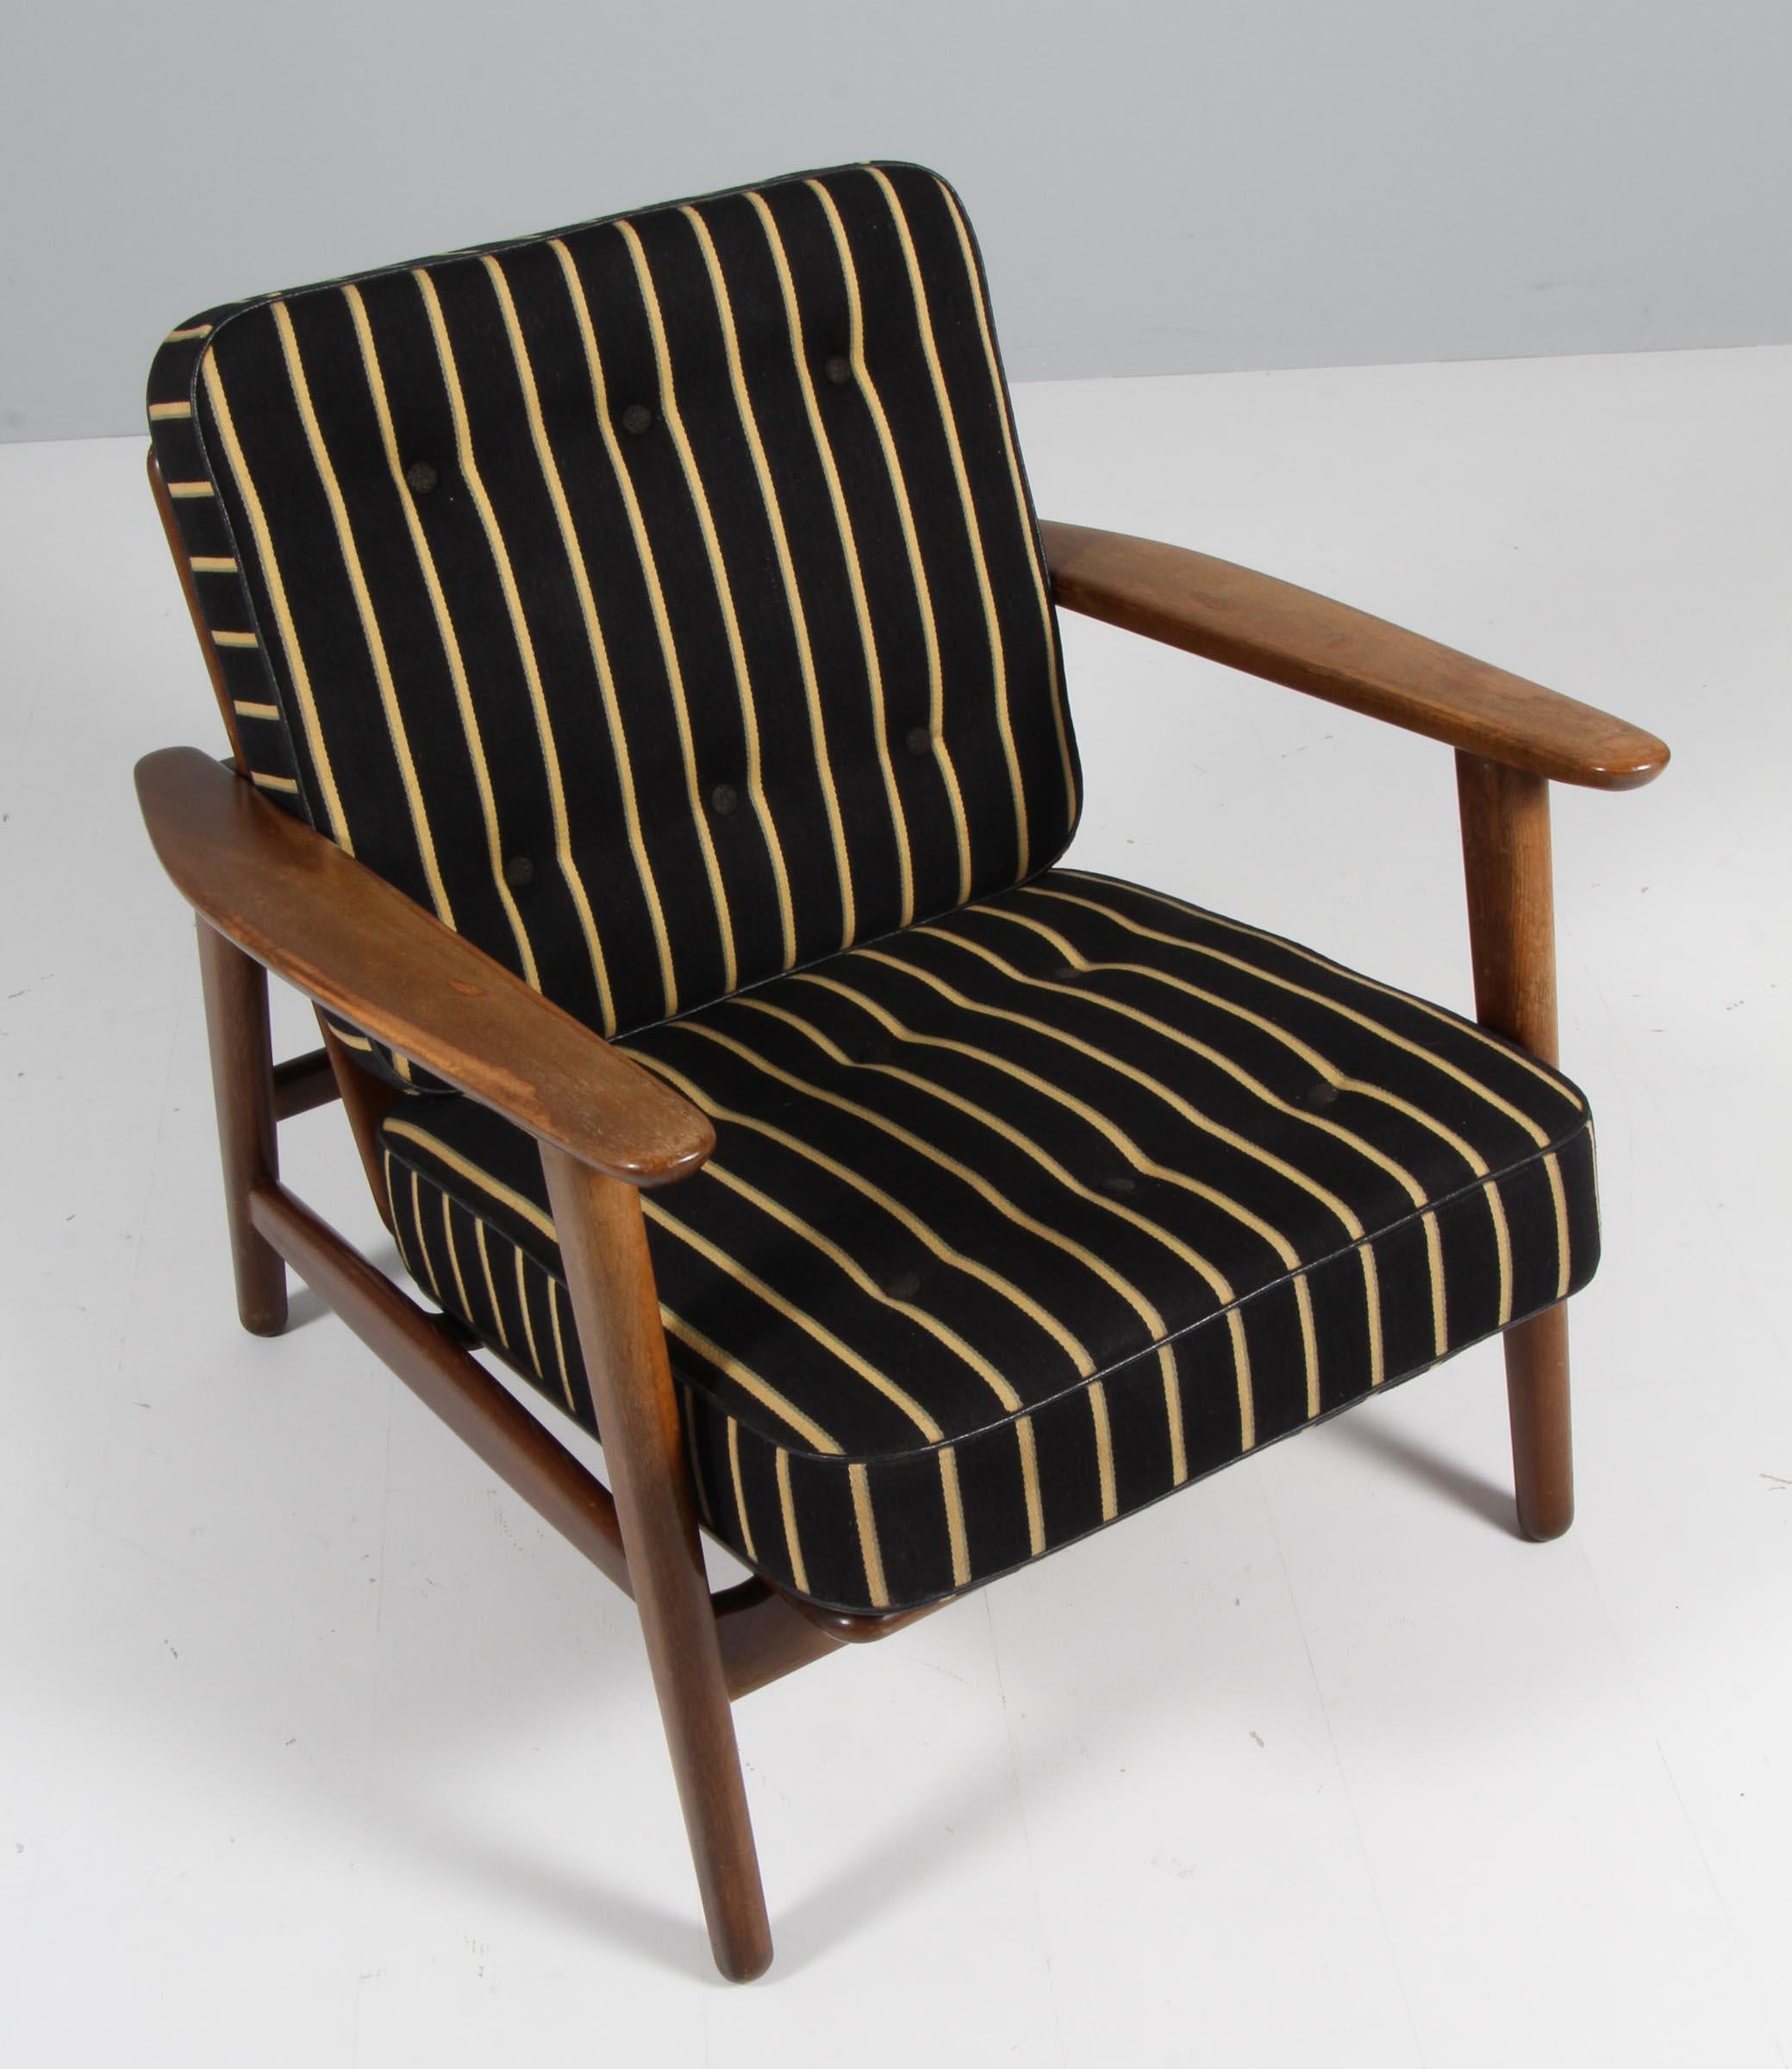 Hans J. Wegner lounge chair with loose cushions original fabric

Stained beech.

Model 233, made by GETAMA.